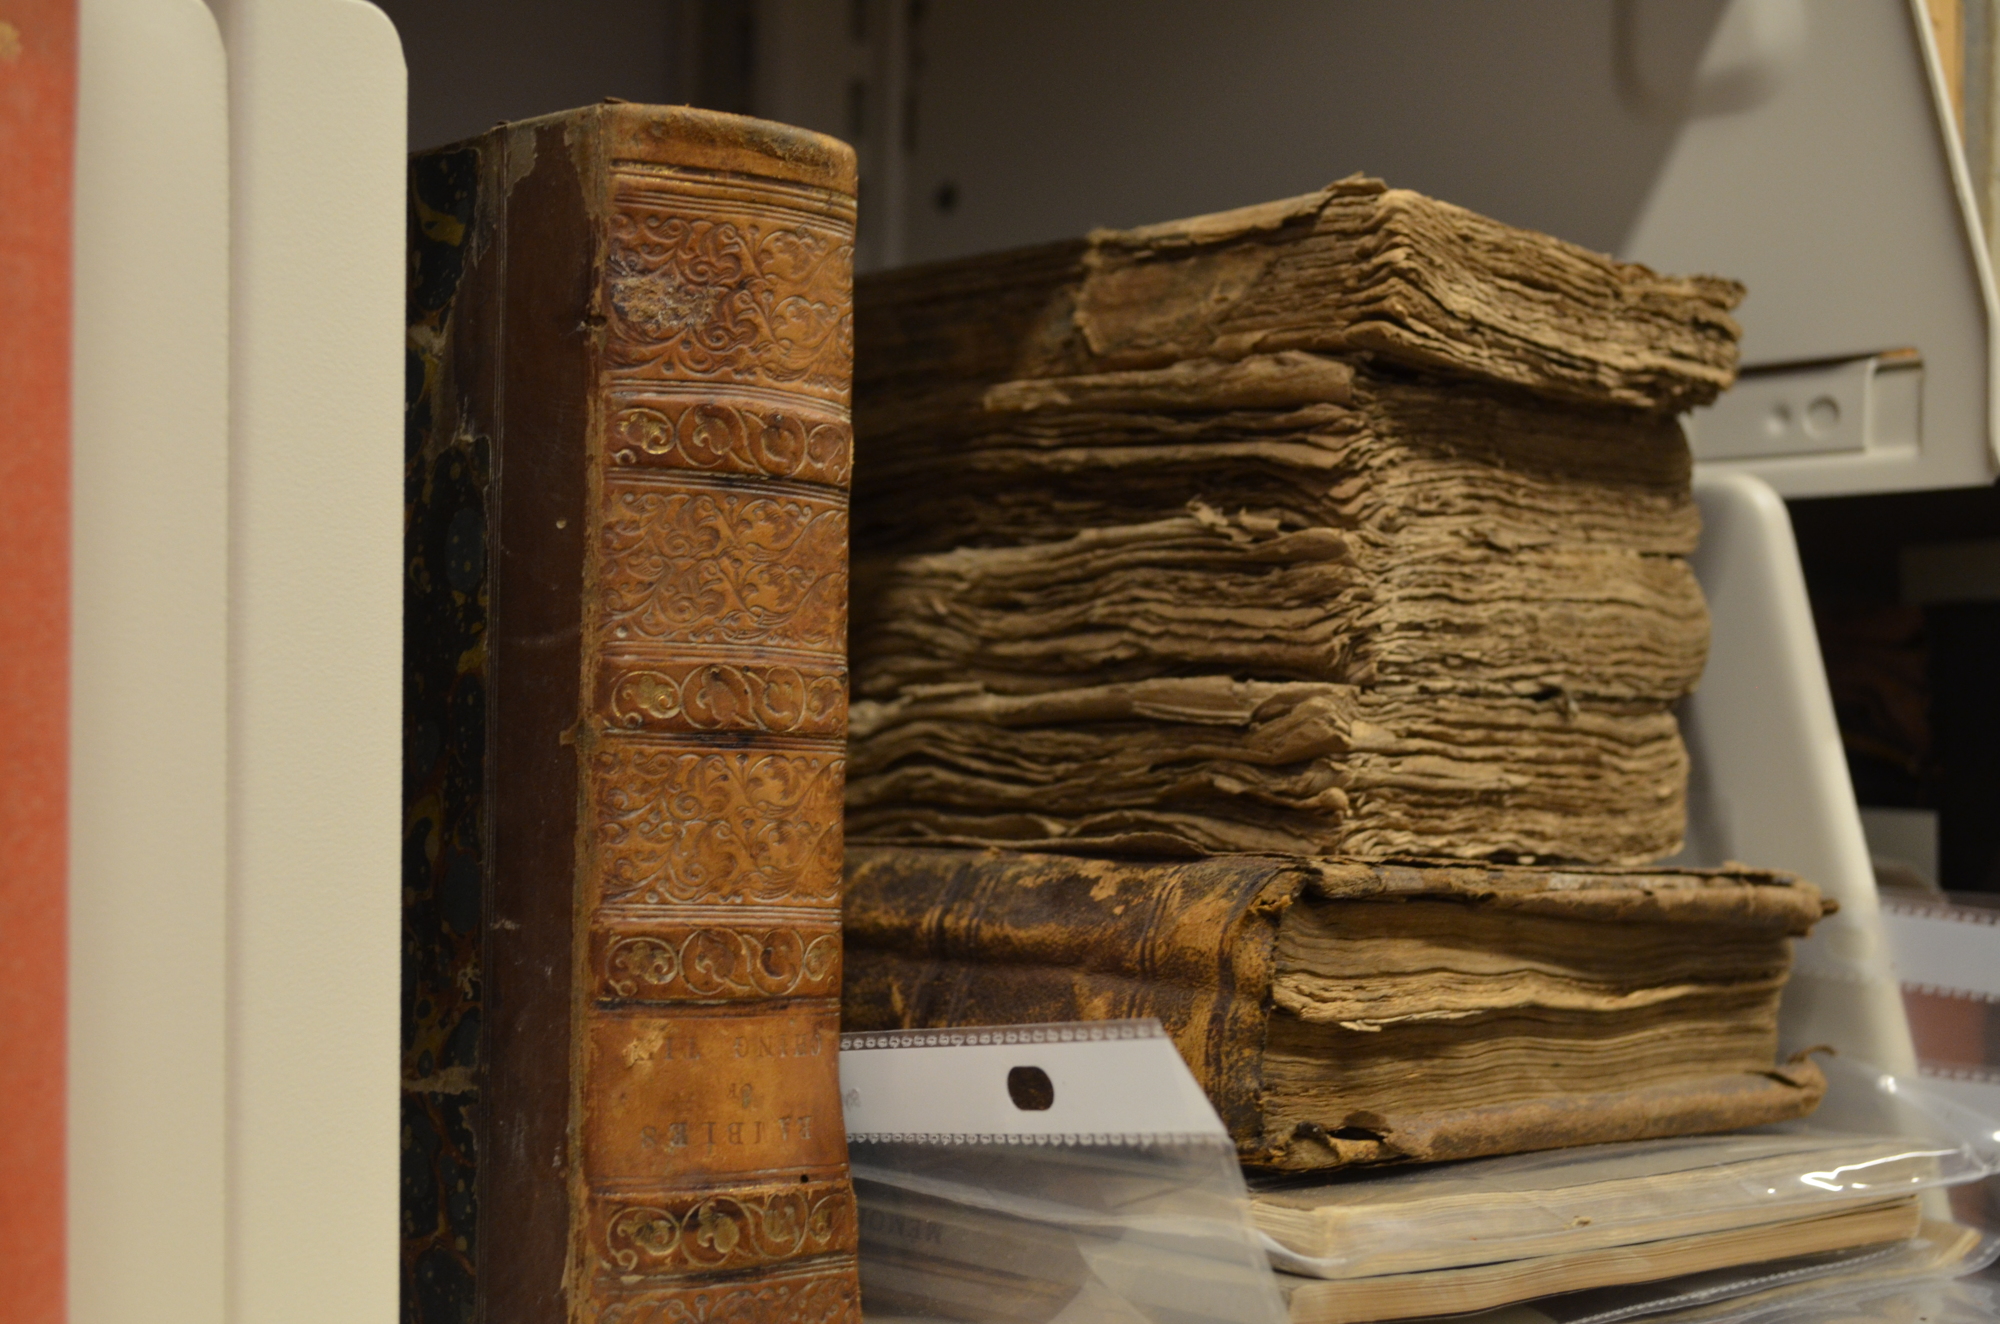 Eide’s collection includes more than 75,000 volumes, including 350 rare books dating back to the 13th century.